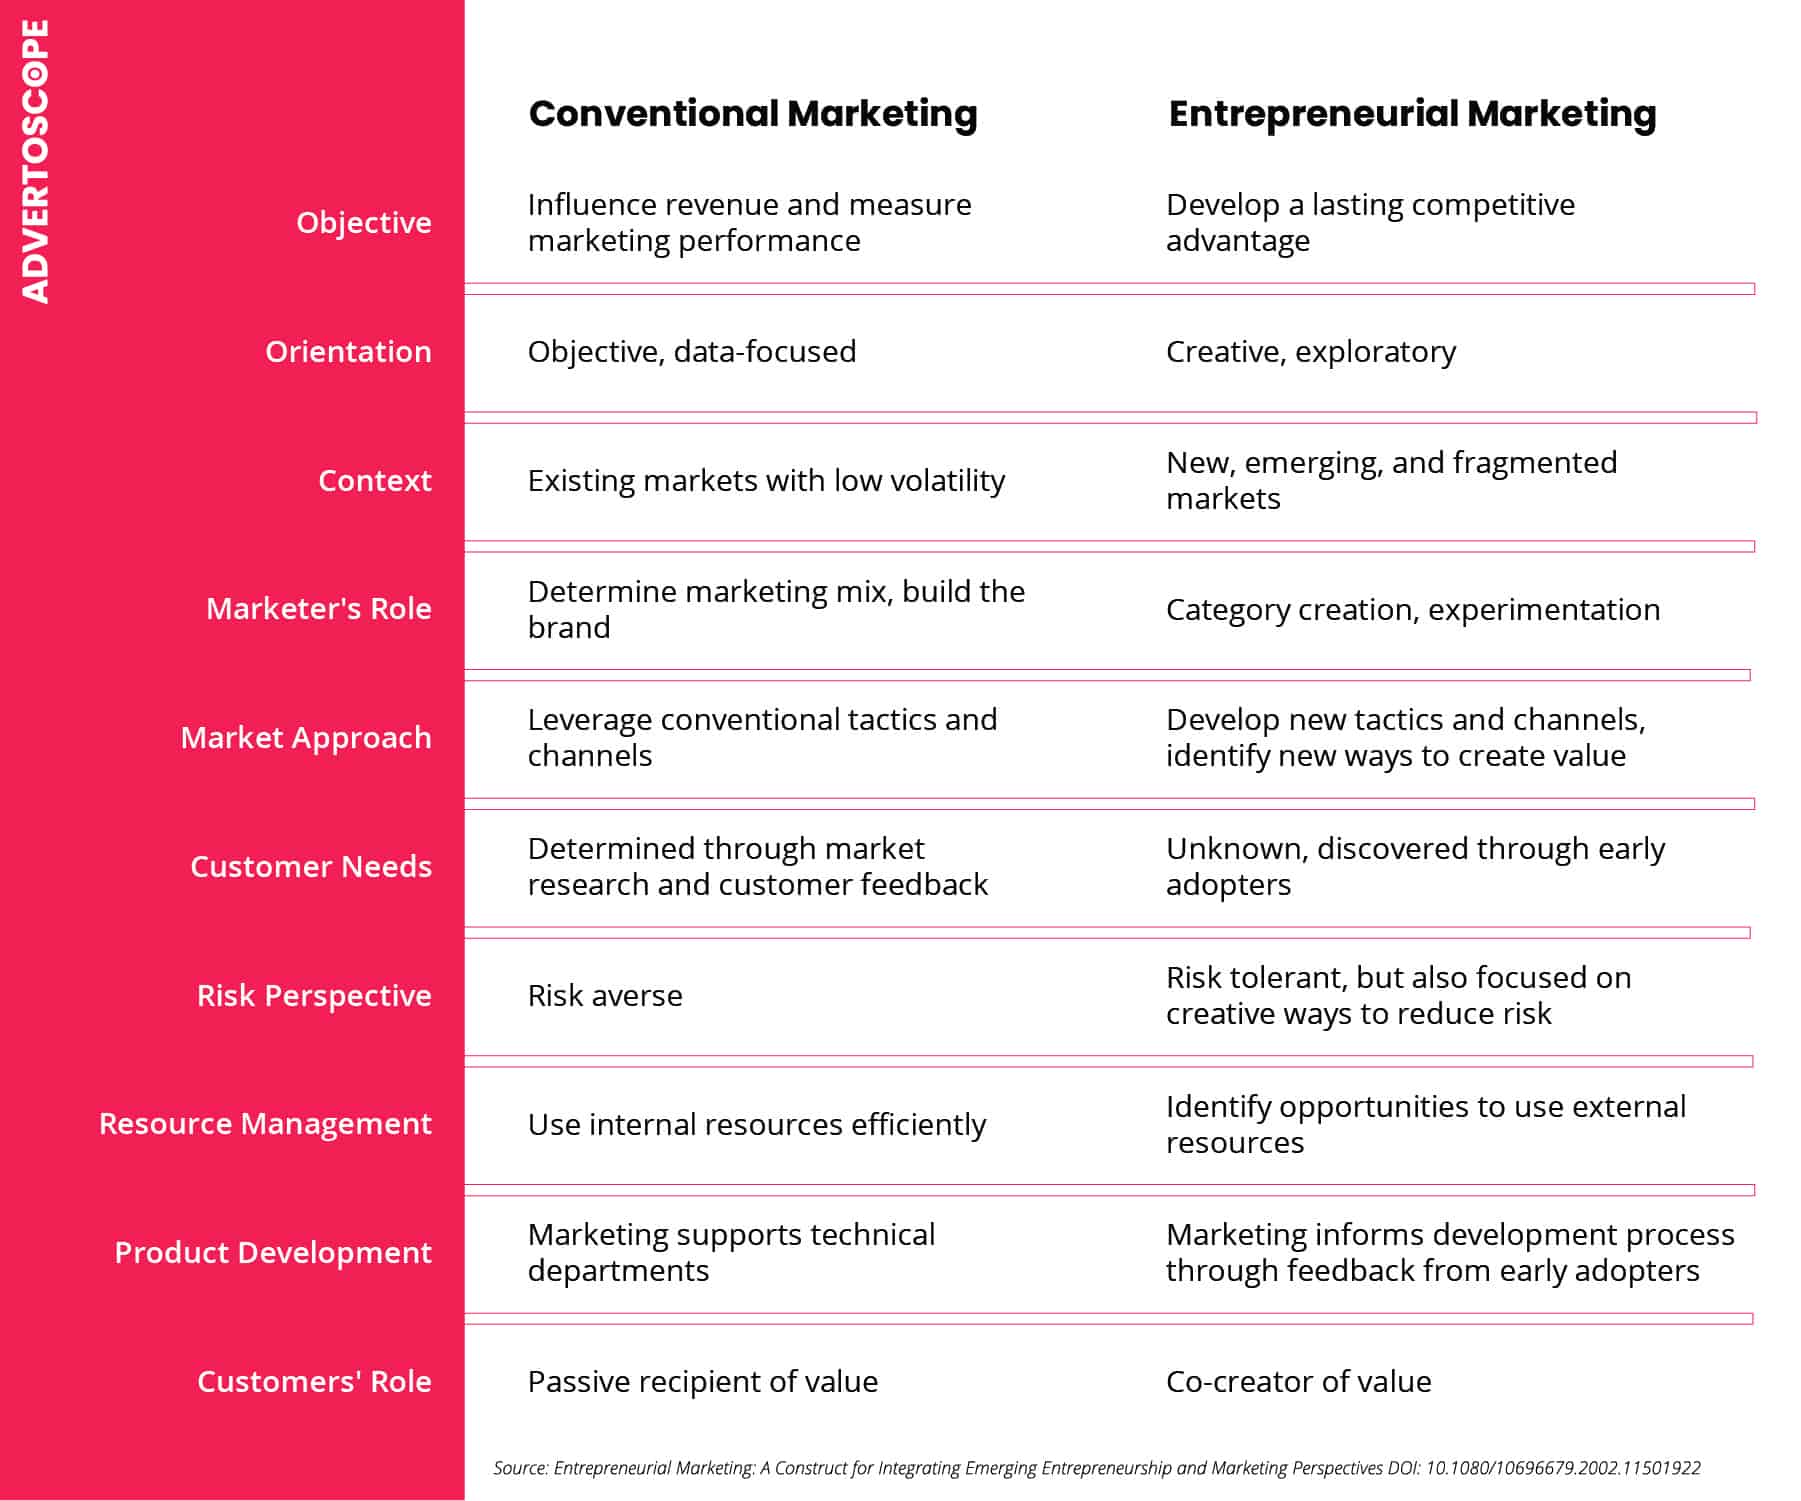 What is entrepreneurial marketing?